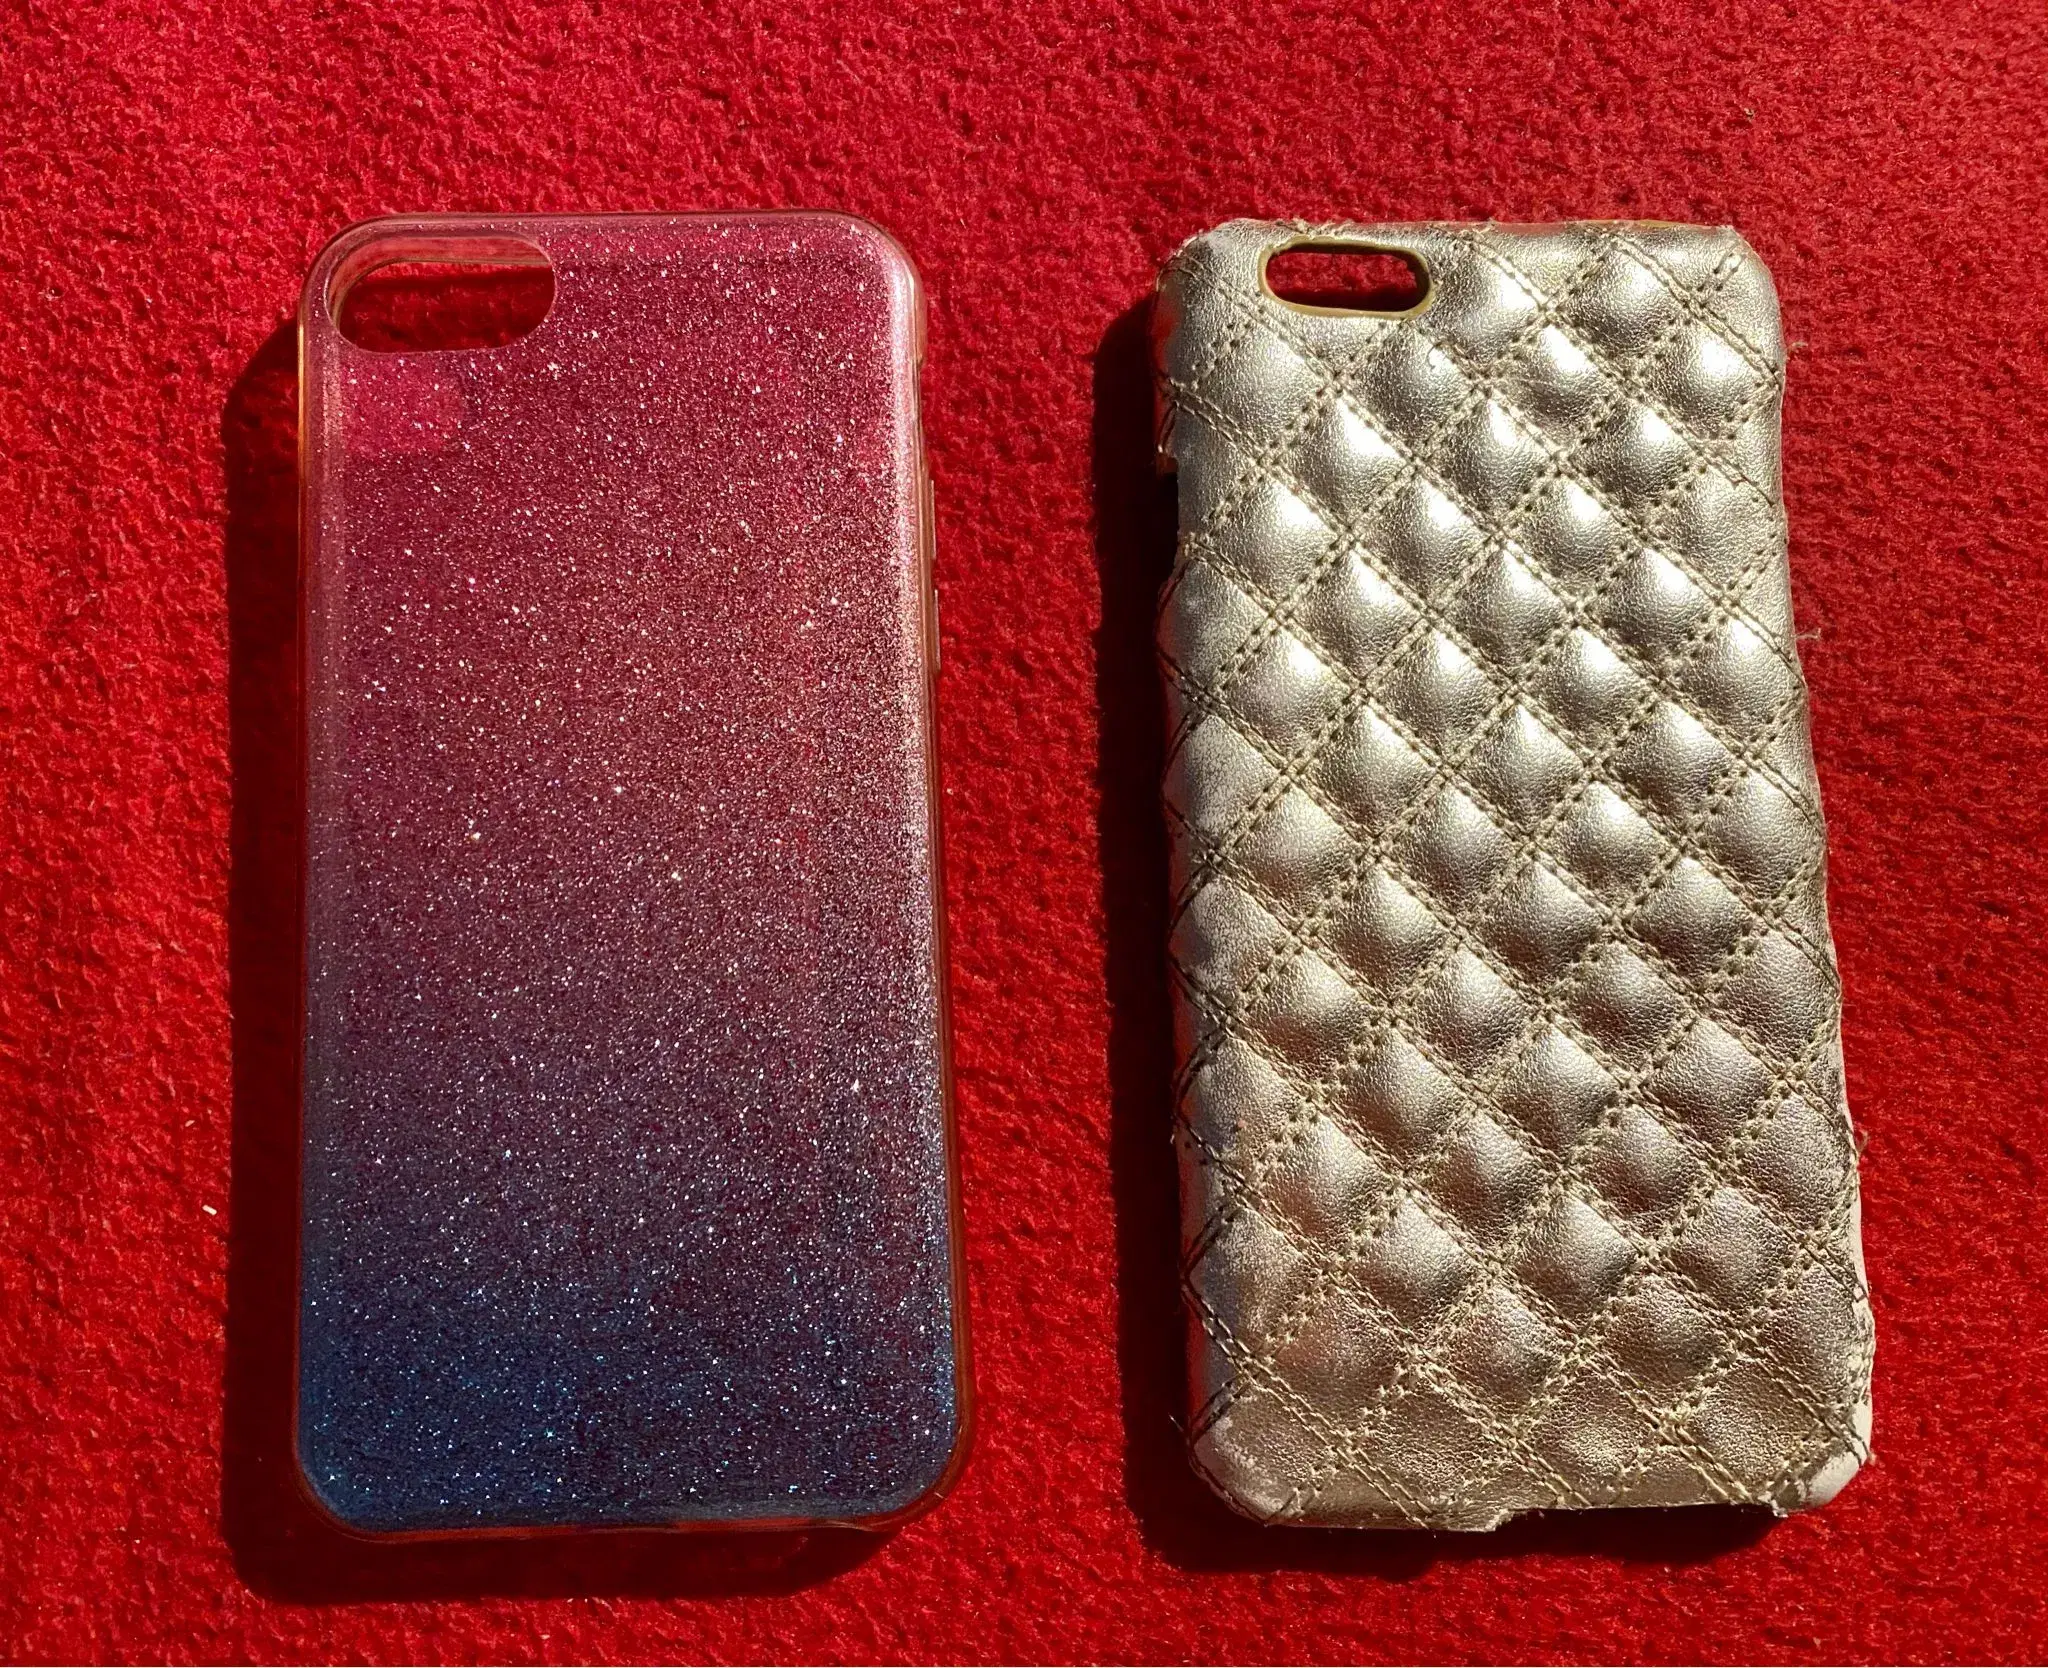 Iphone 6S covers til salg